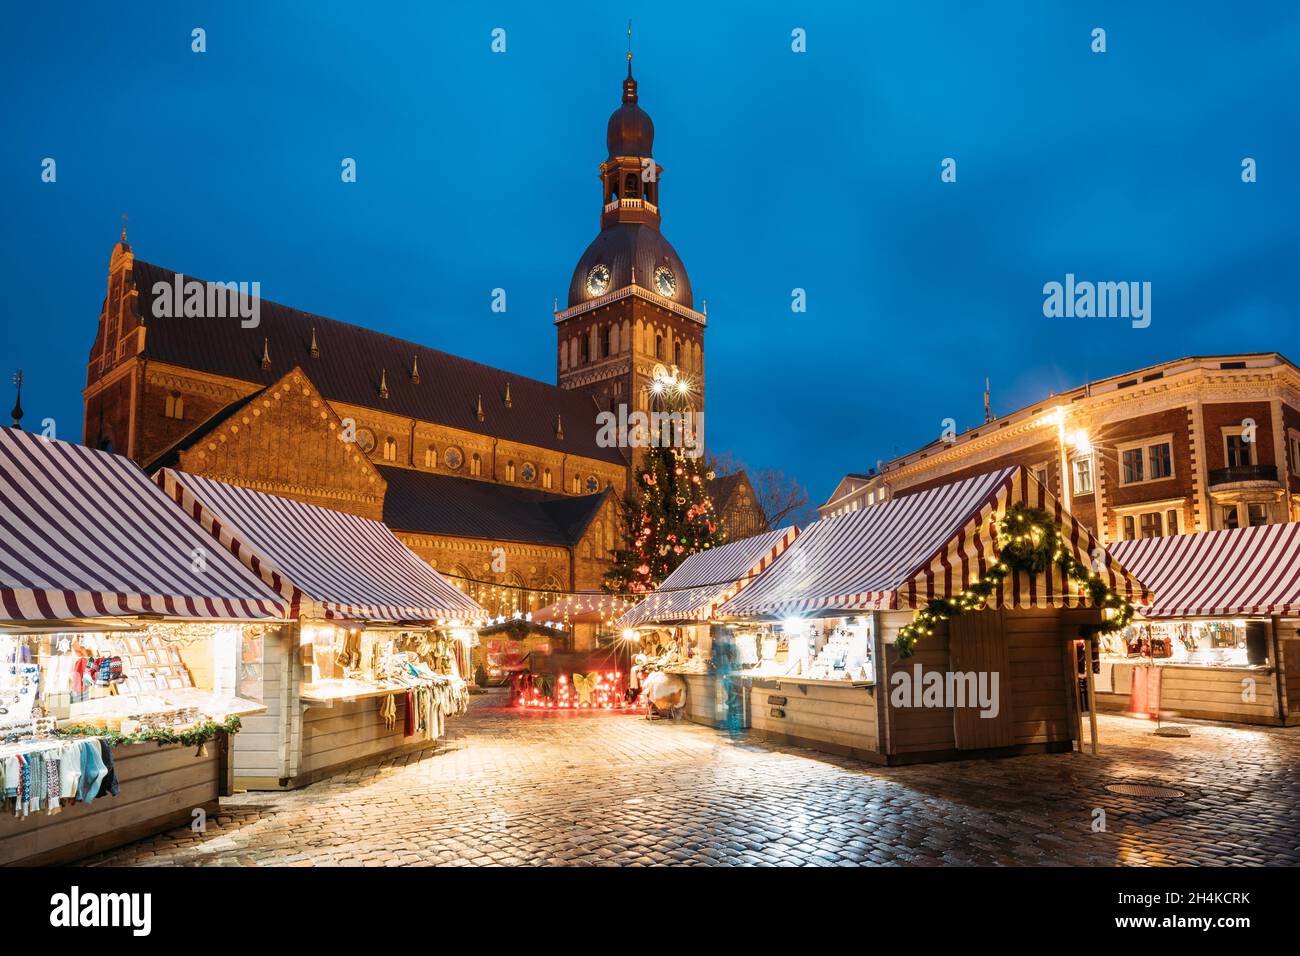 Riga, Latvia. Christmas Market On Dome Square With Riga Dome Cathedral.  Christmas Tree And Trading Houses. Famous Landmark At Winter Xmas Evening  Stock Photo - Alamy